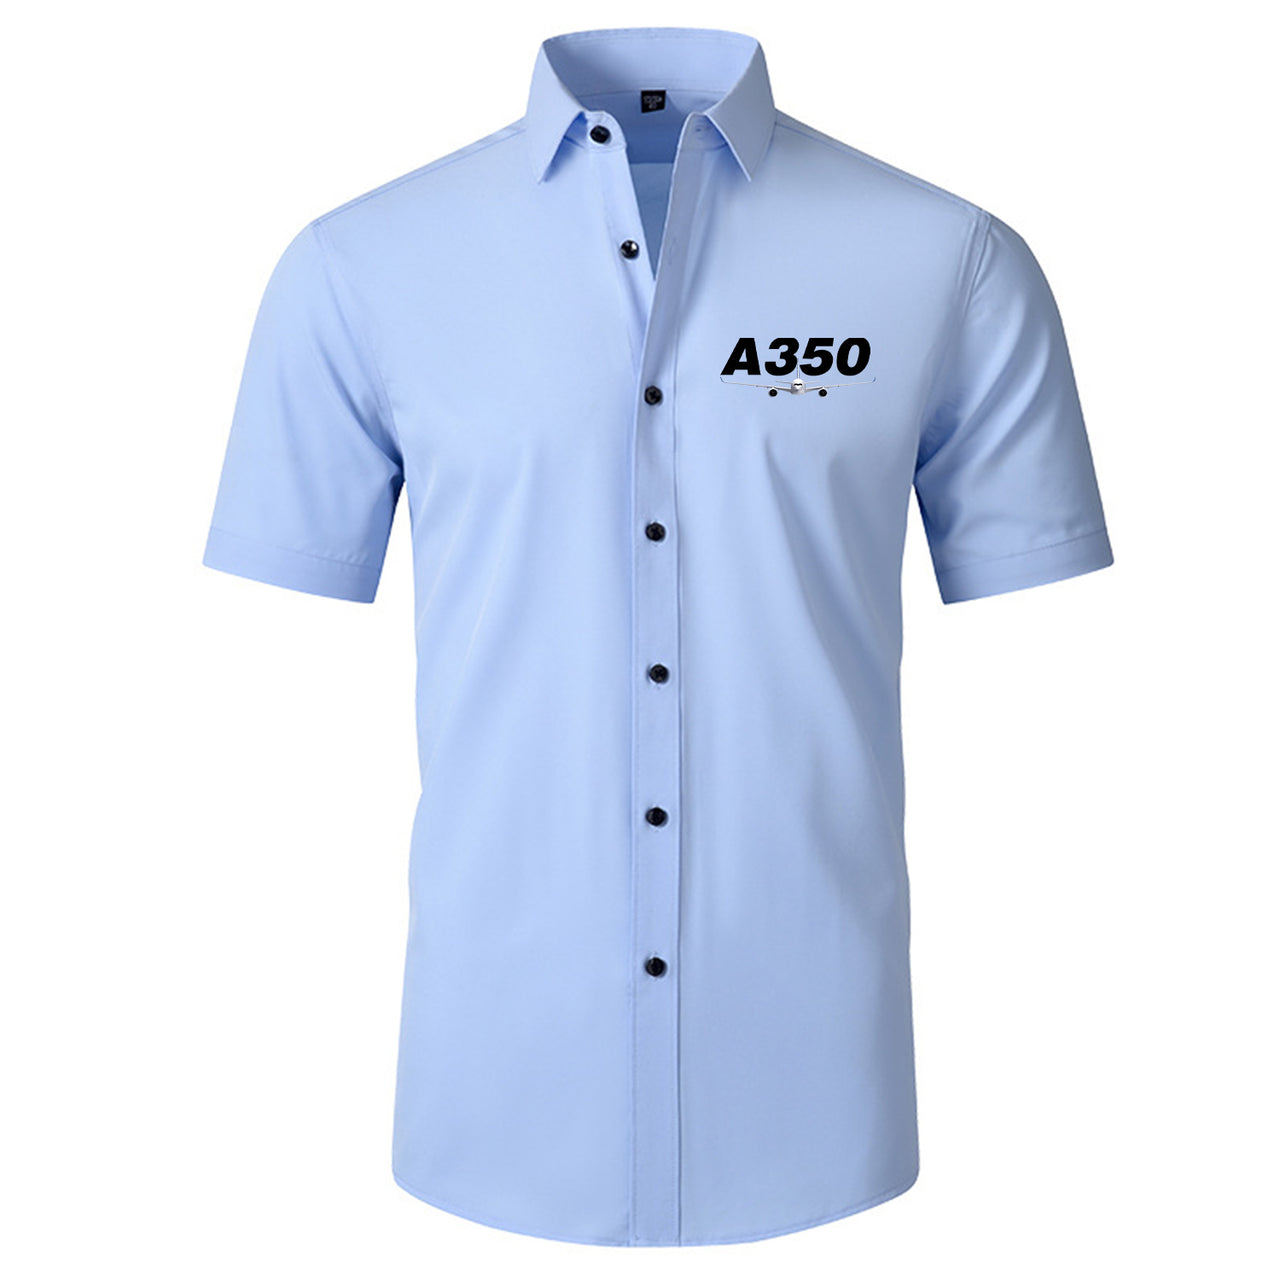 Super Airbus A350 Designed Short Sleeve Shirts